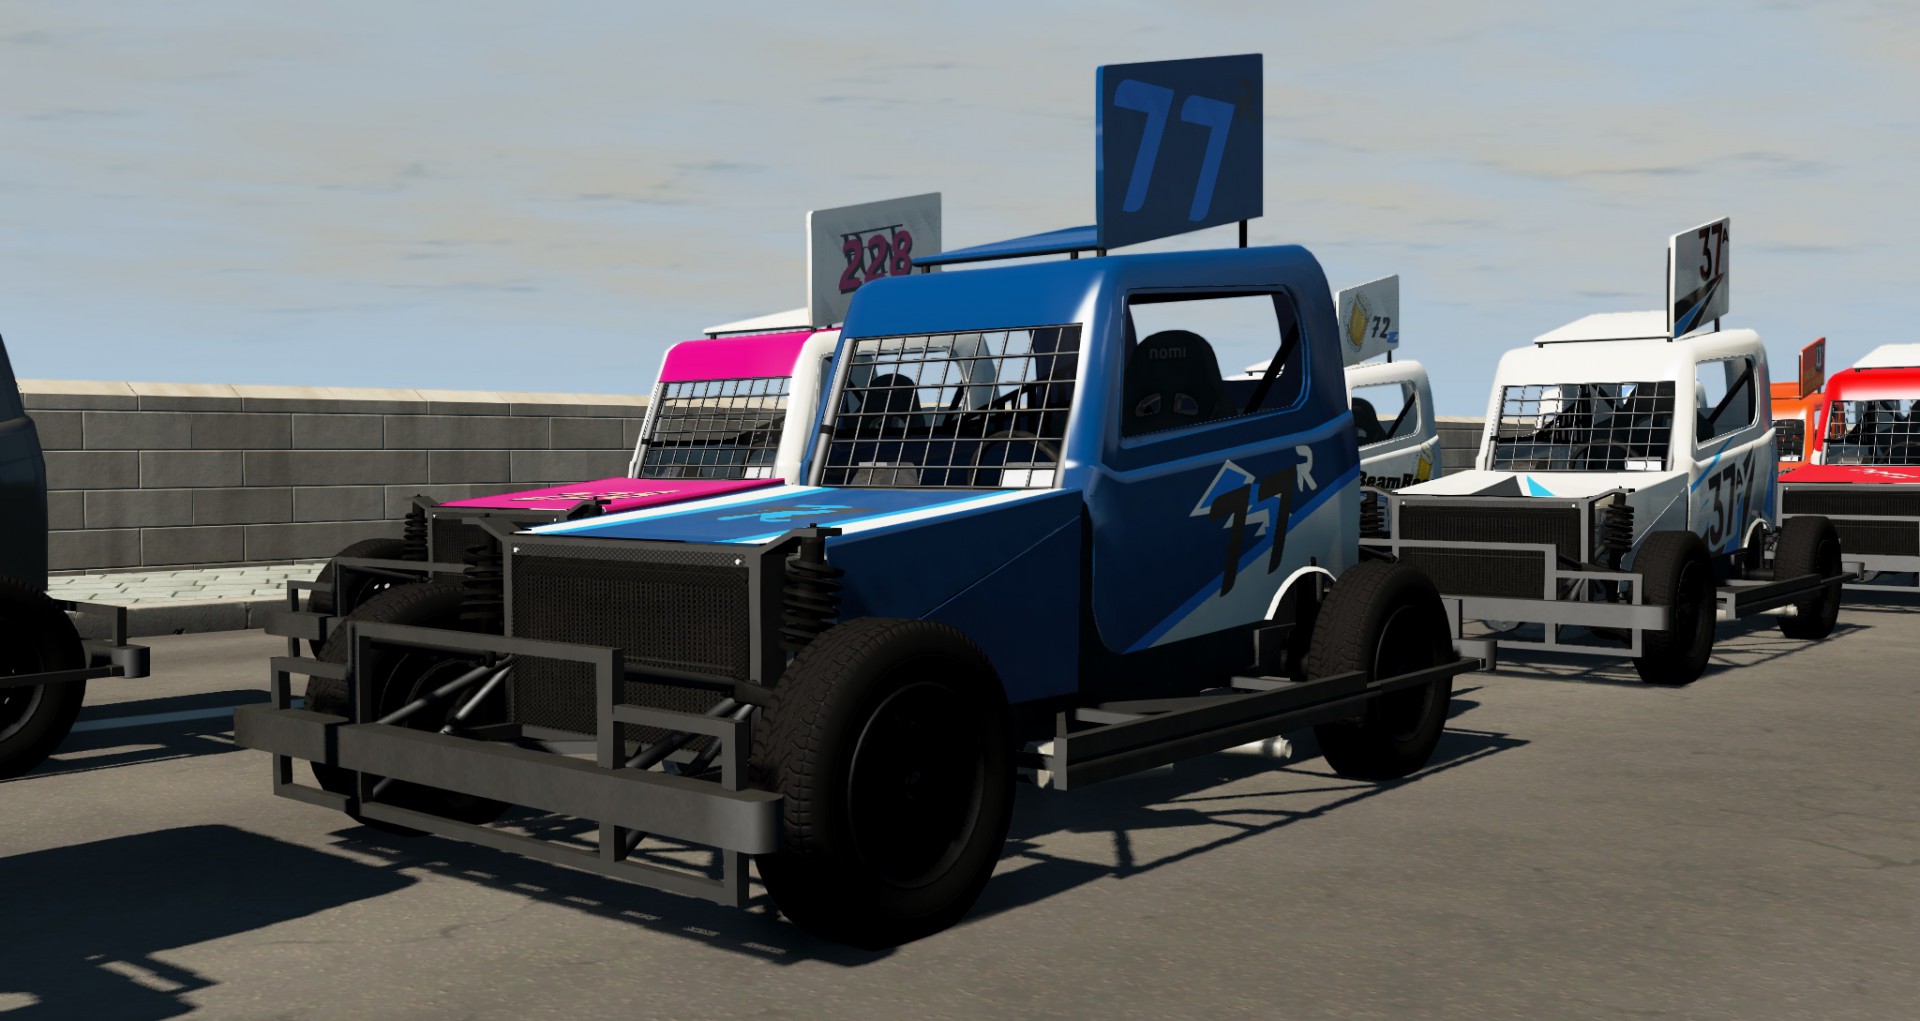 Beamng mod pack